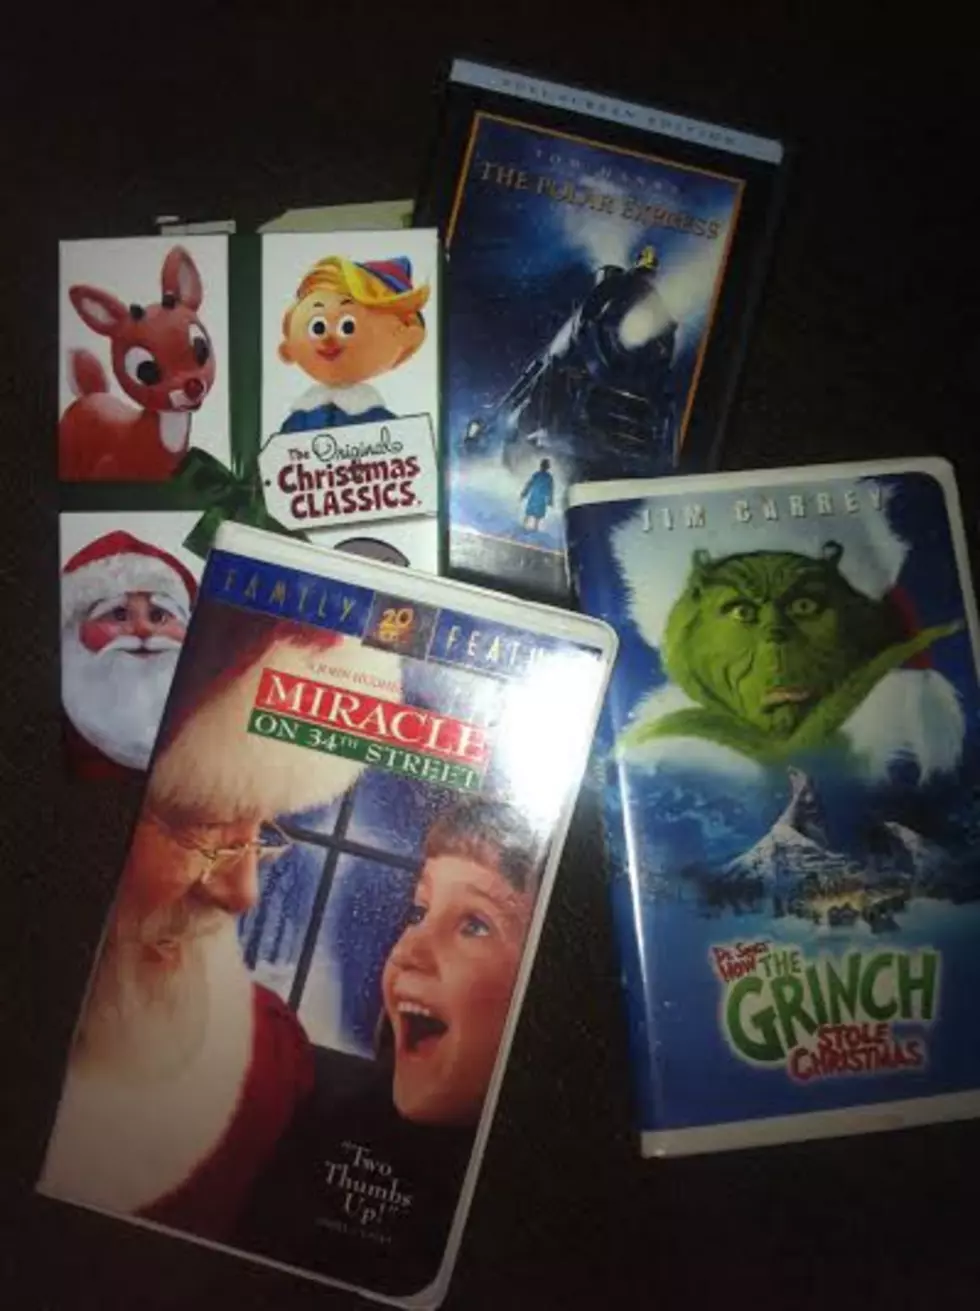 Best Holiday Movies for Kids, Humor and The True Meaning of Christmas